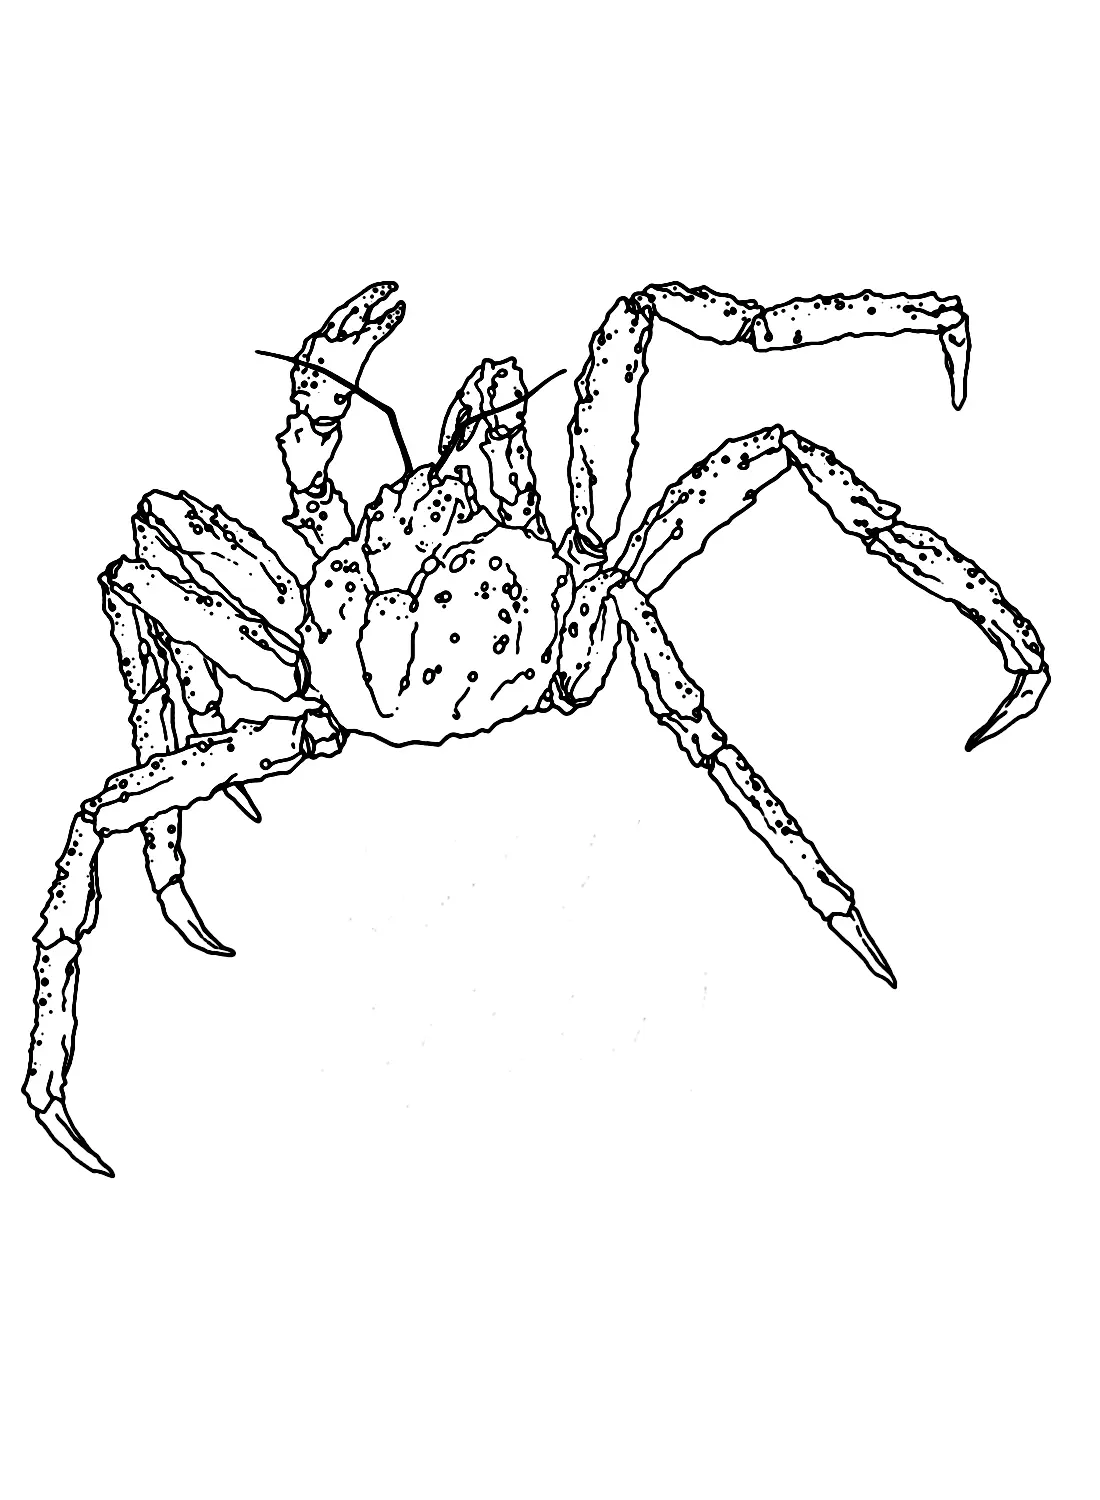 King Crab Coloring Pages